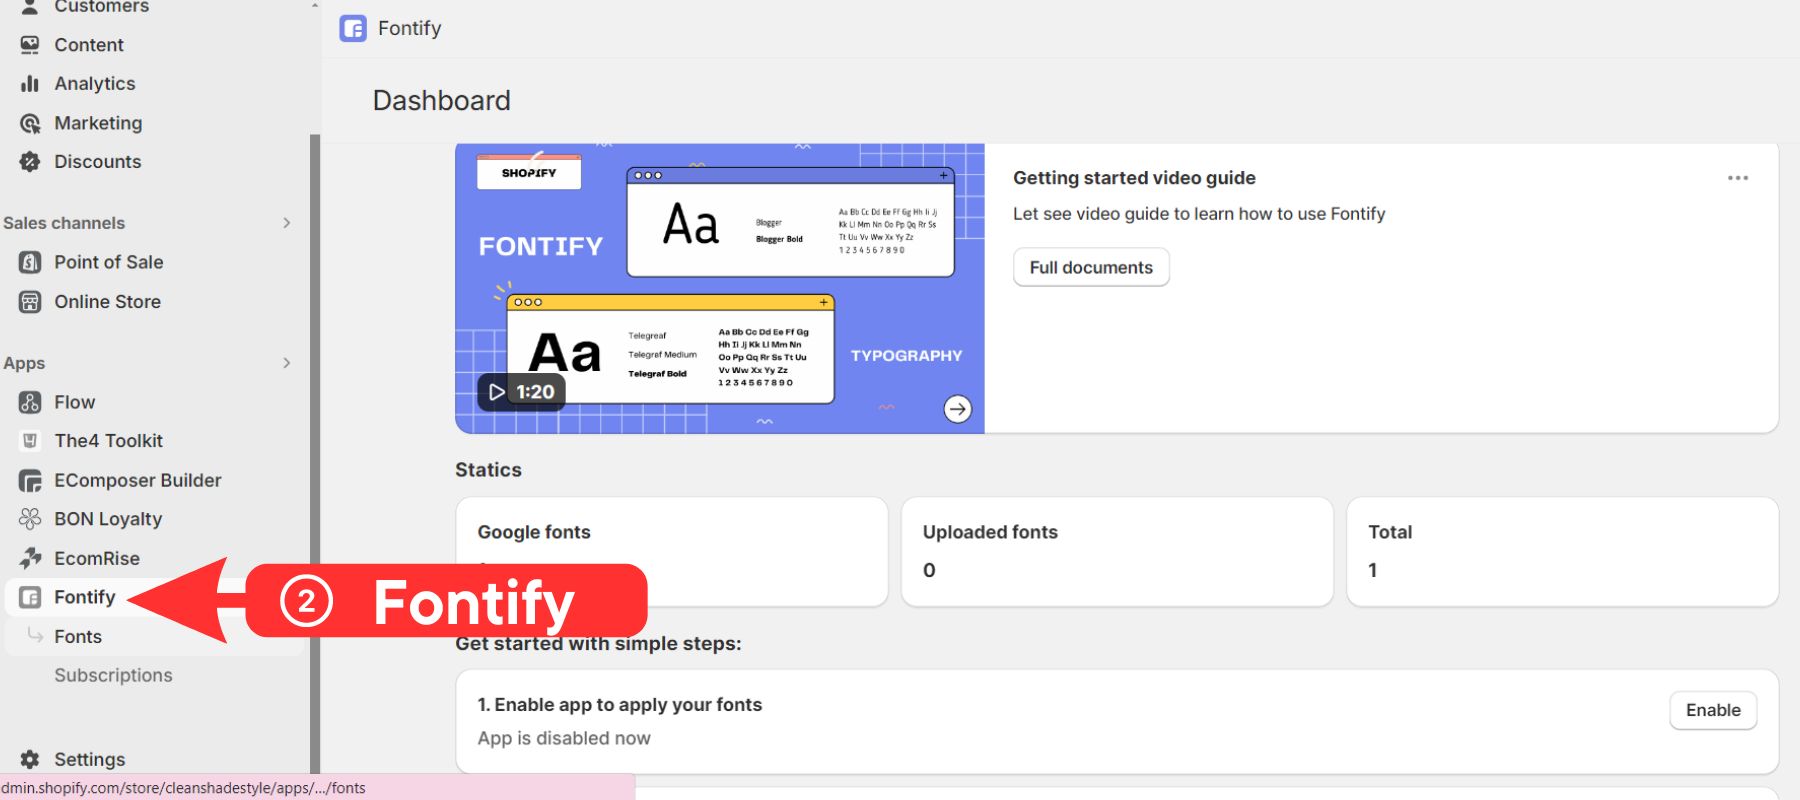 Change fonts in the Fontify dashboard